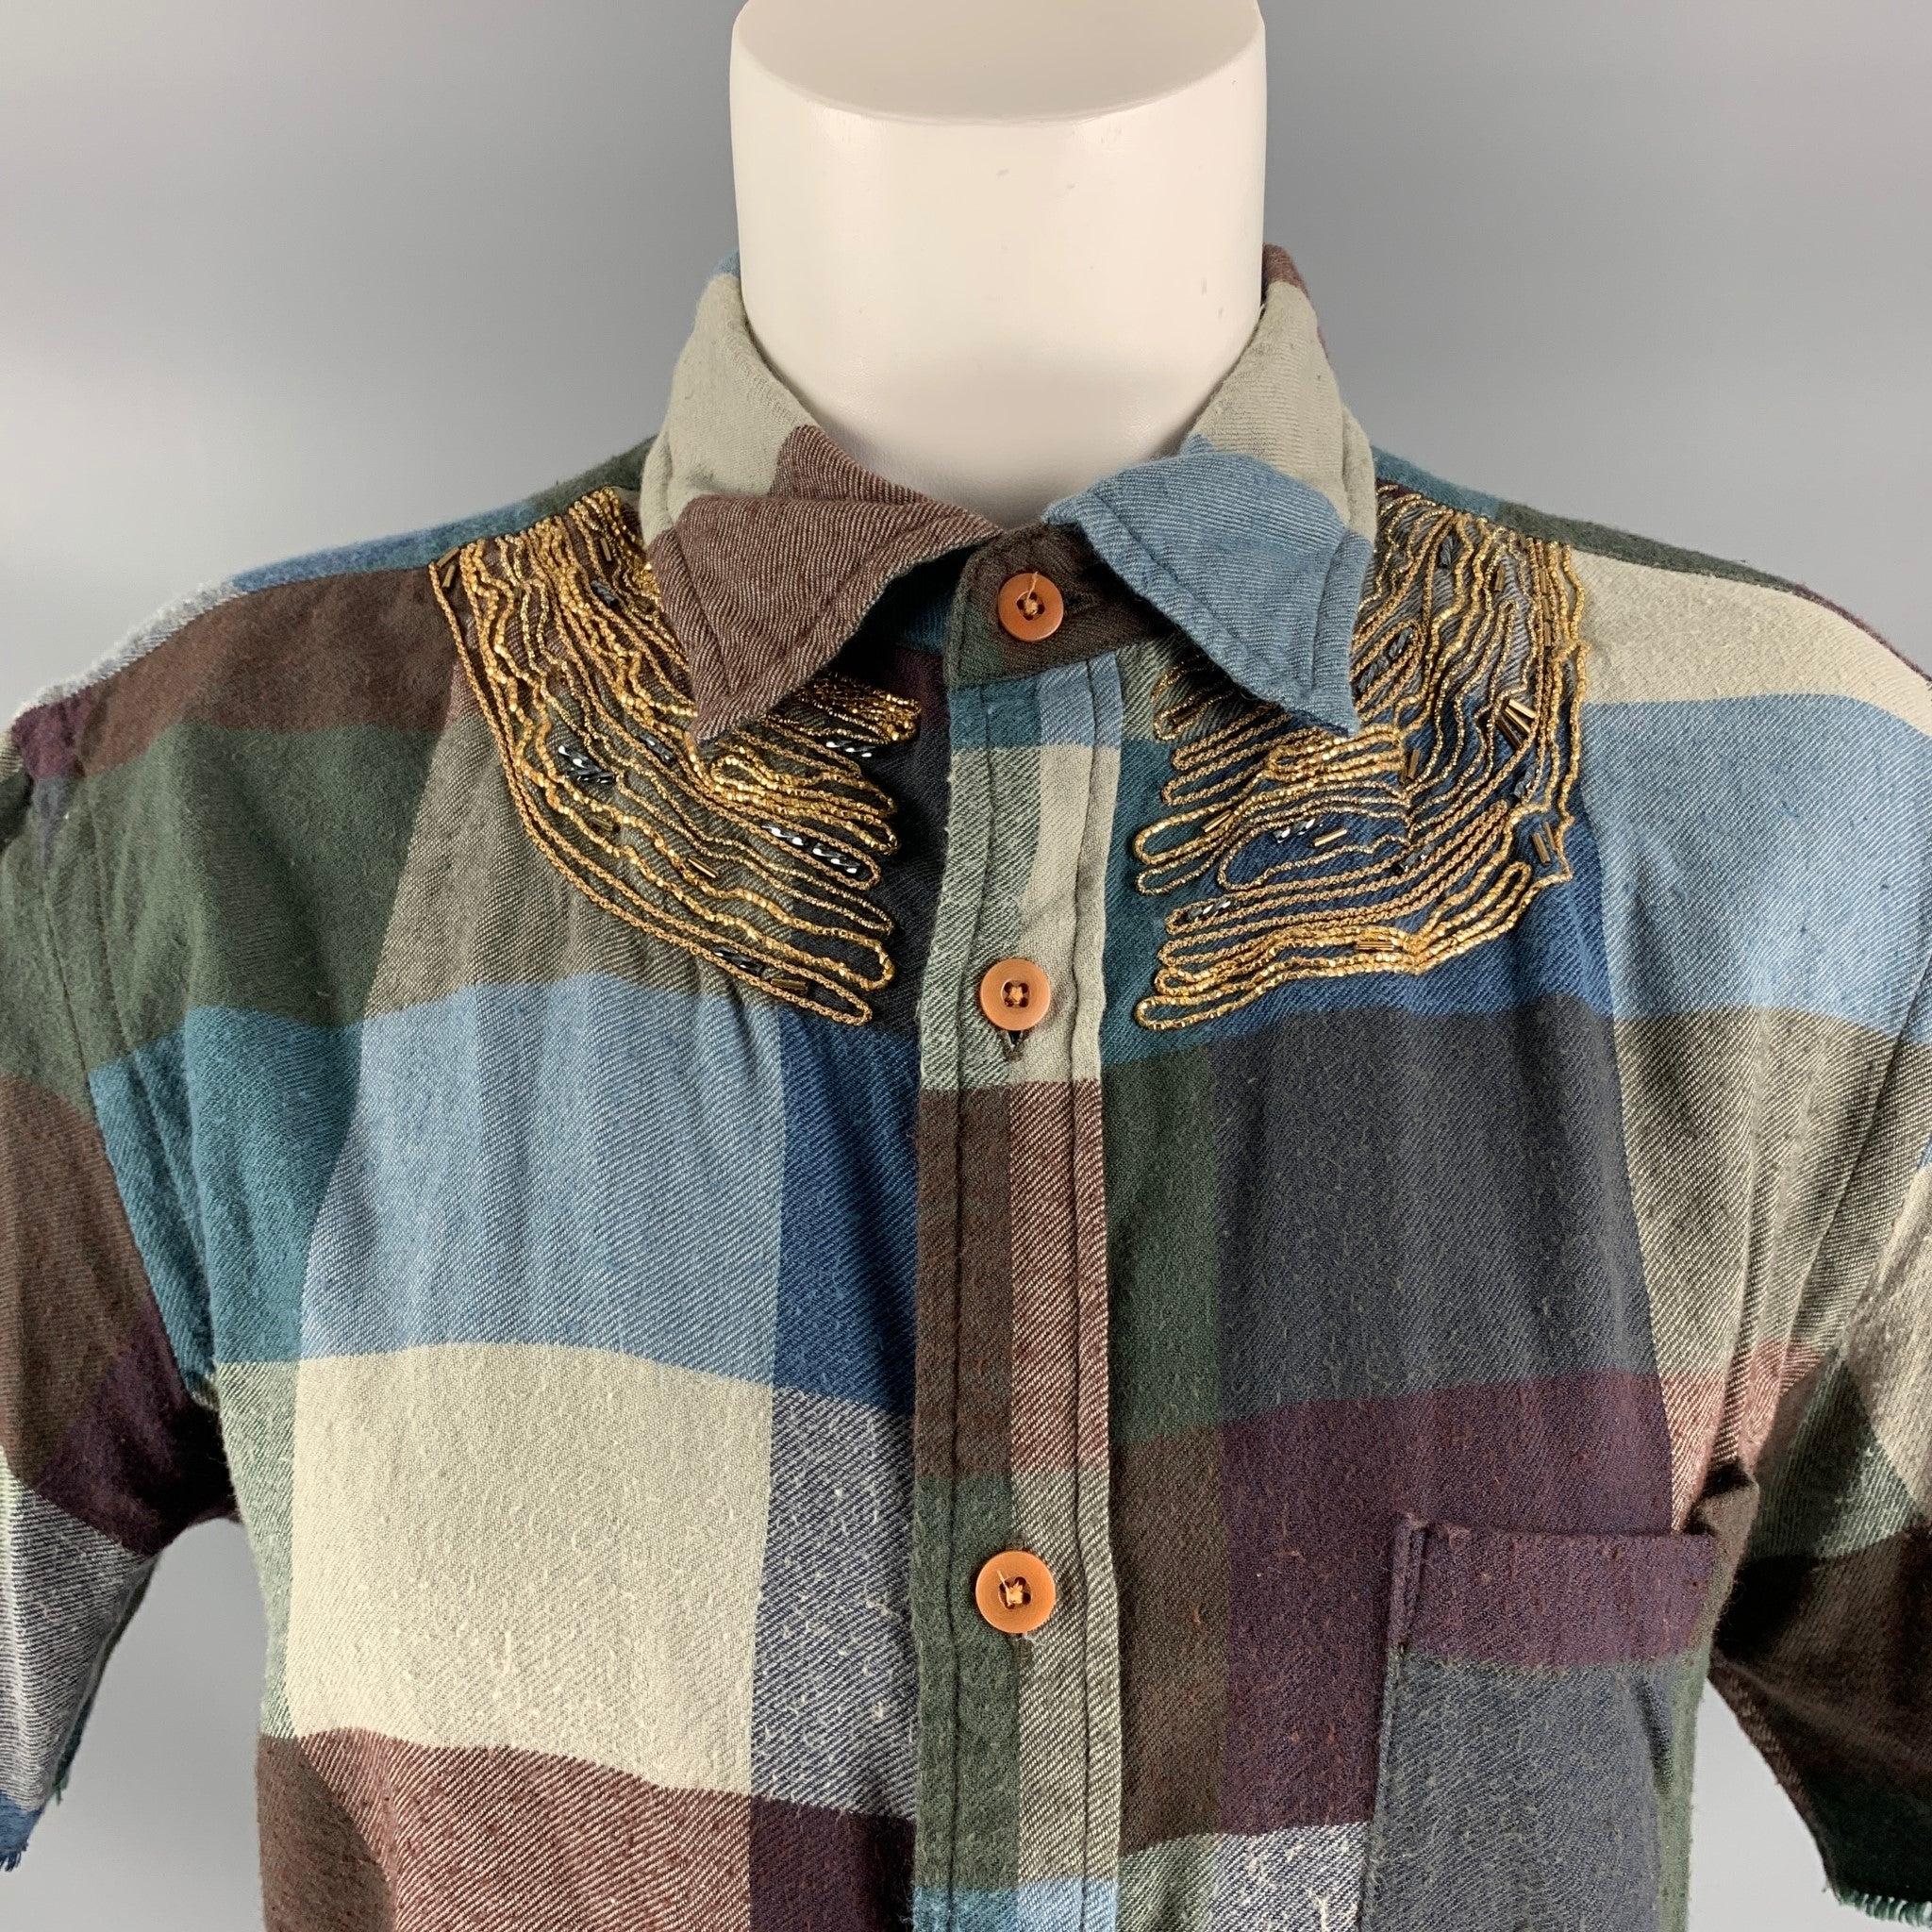 KOLOR short sleeve casual top comes in checkered cotton and cashmere fabric, straight collar and button down closure features a gold tone embroidery. Made in Japan.Very Good Pre-Owned Condition.  
 

 Marked:  3 
 

 Measurements: 
  
 Shoulder: